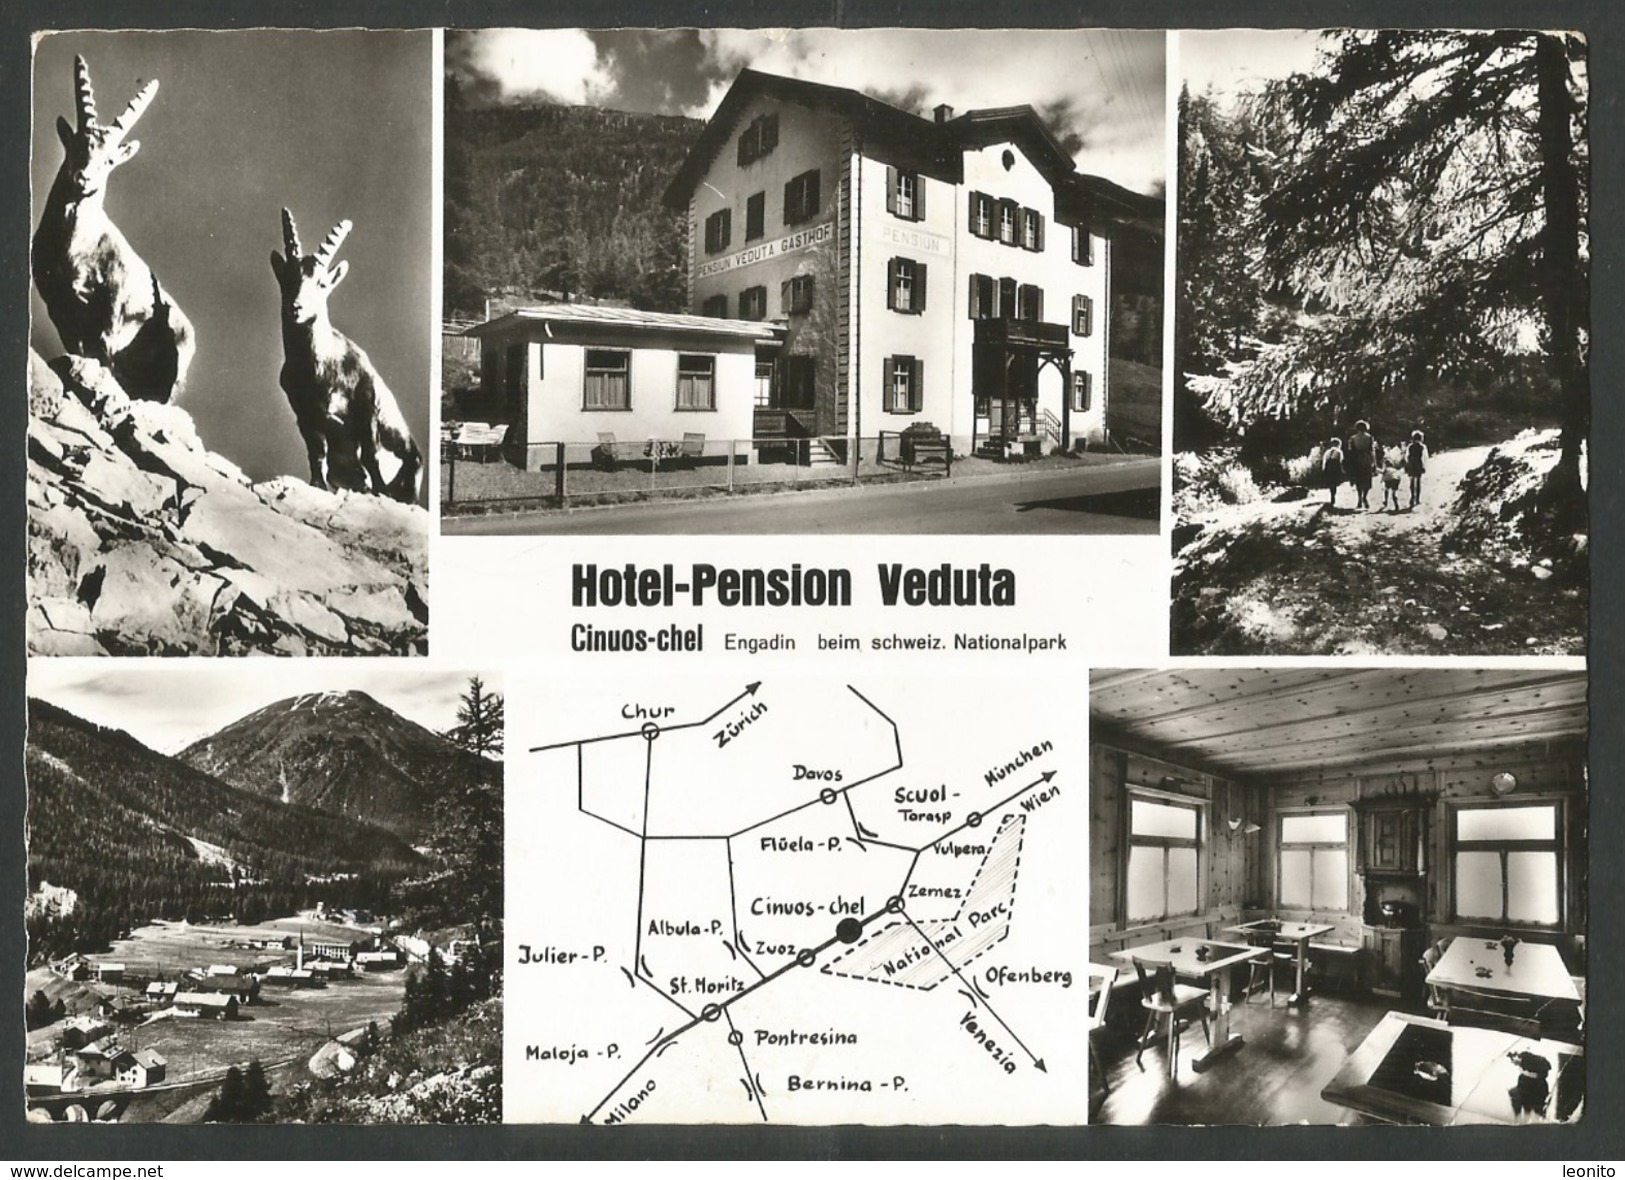 S-CHANF GR Cinuos-chel Hotel Pension VEDUTA 1971 - S-chanf